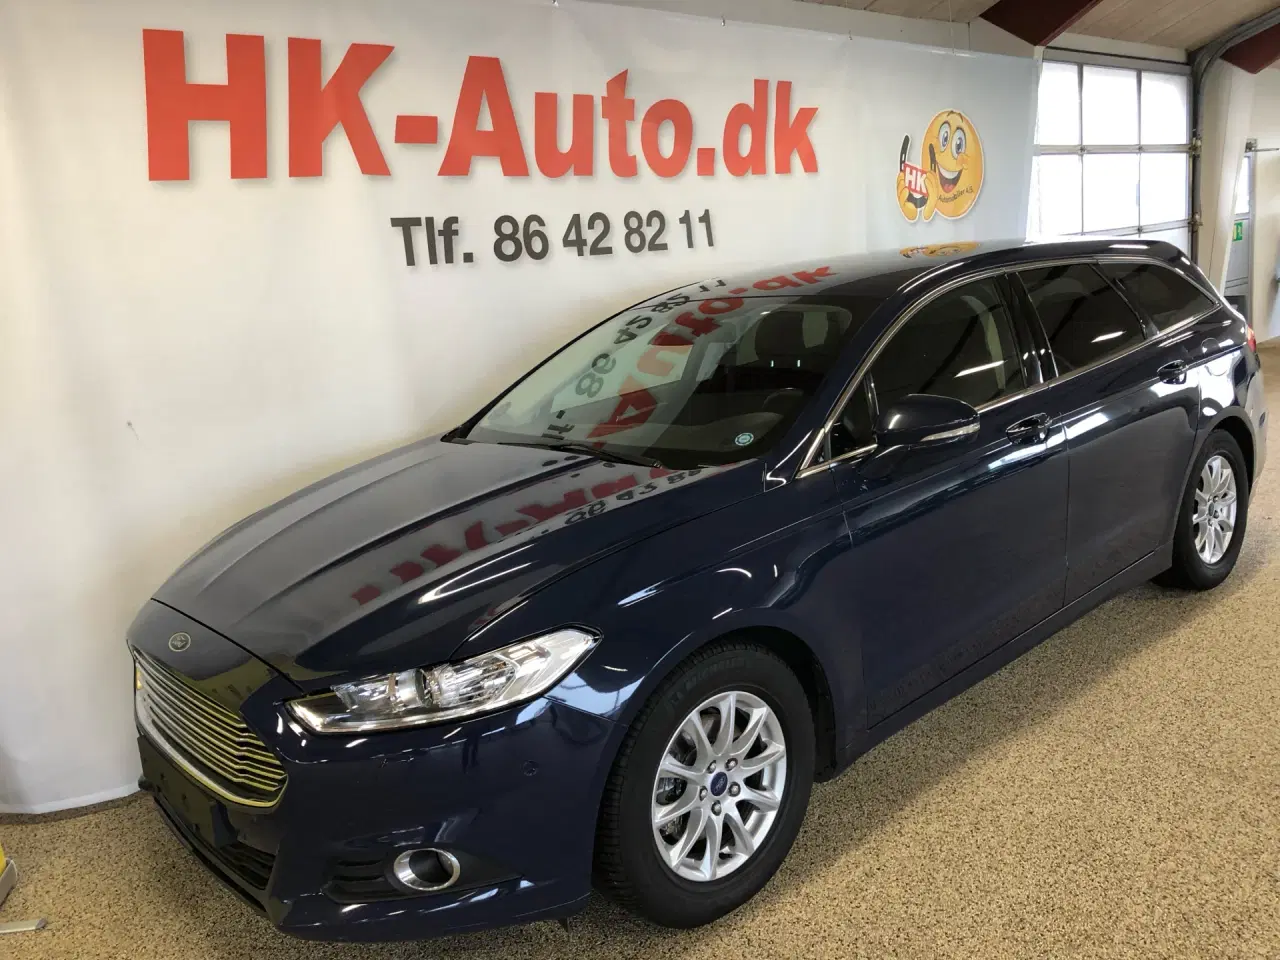 Billede 1 - Ford Mondeo 2,0 TDCi ECOnetic Trend 150HK Stc 6g